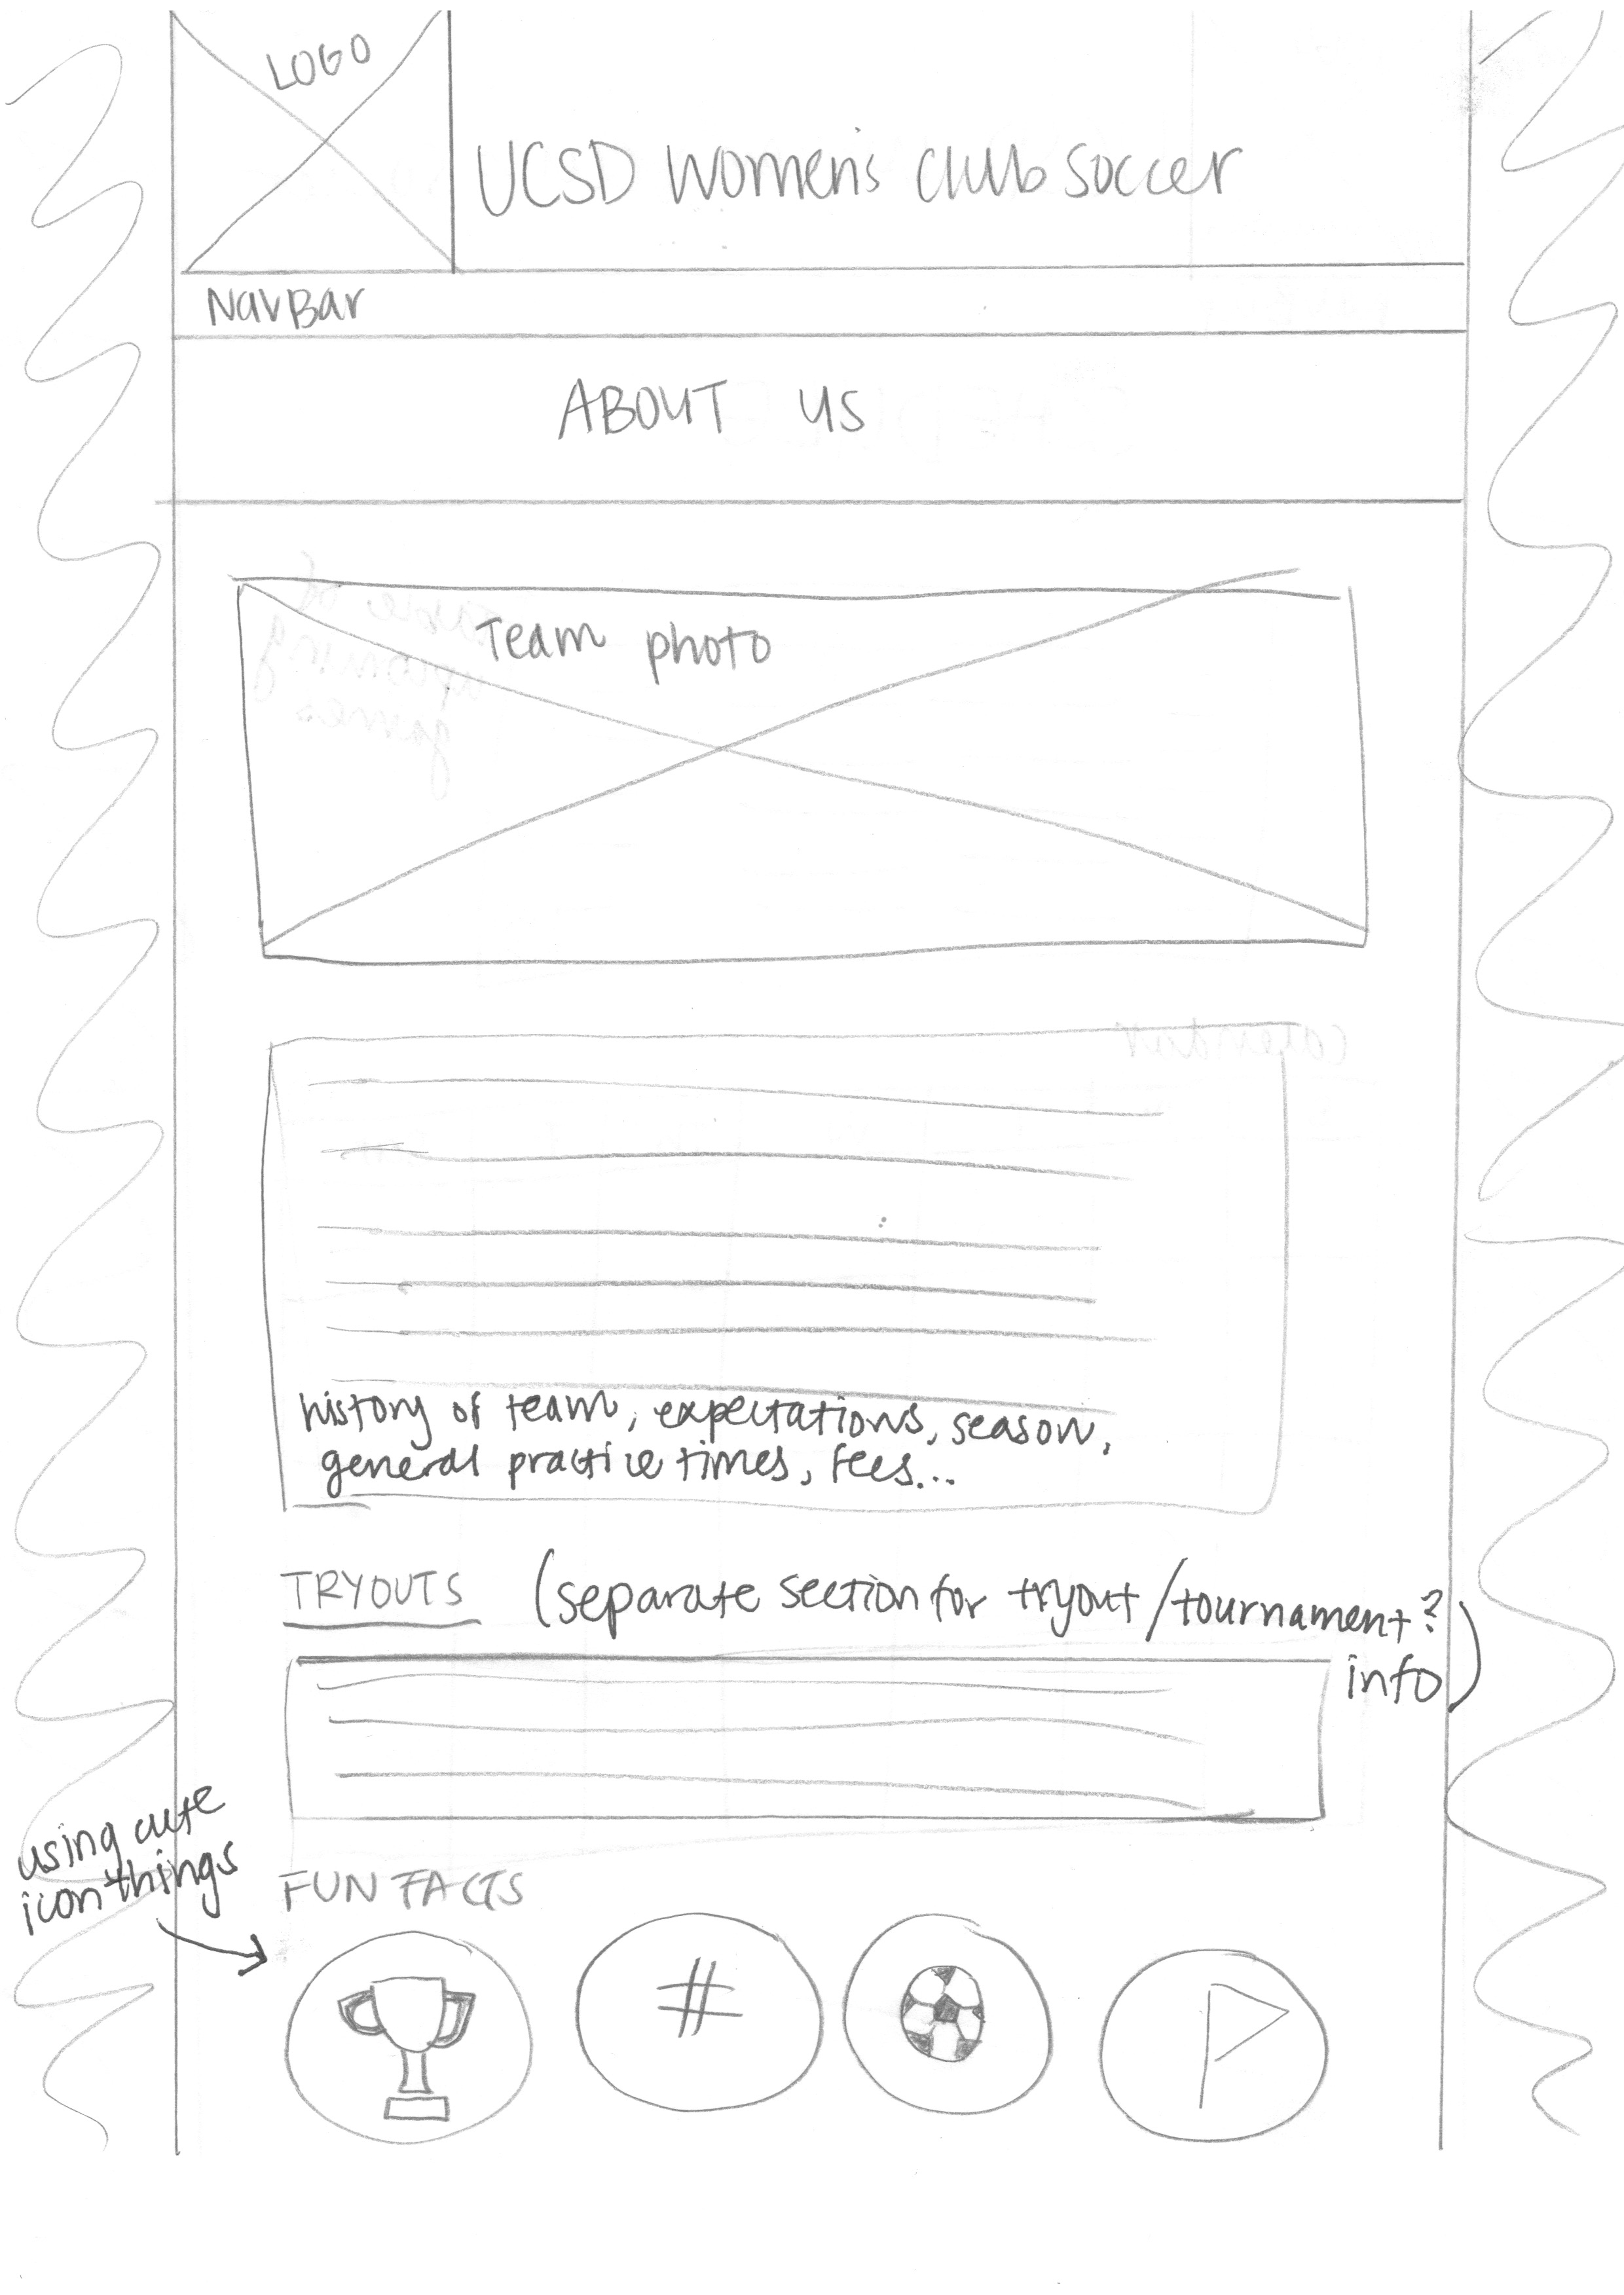  Rapid Prototyping - Another example of our paper prototyping, this time for our 'About' page. 